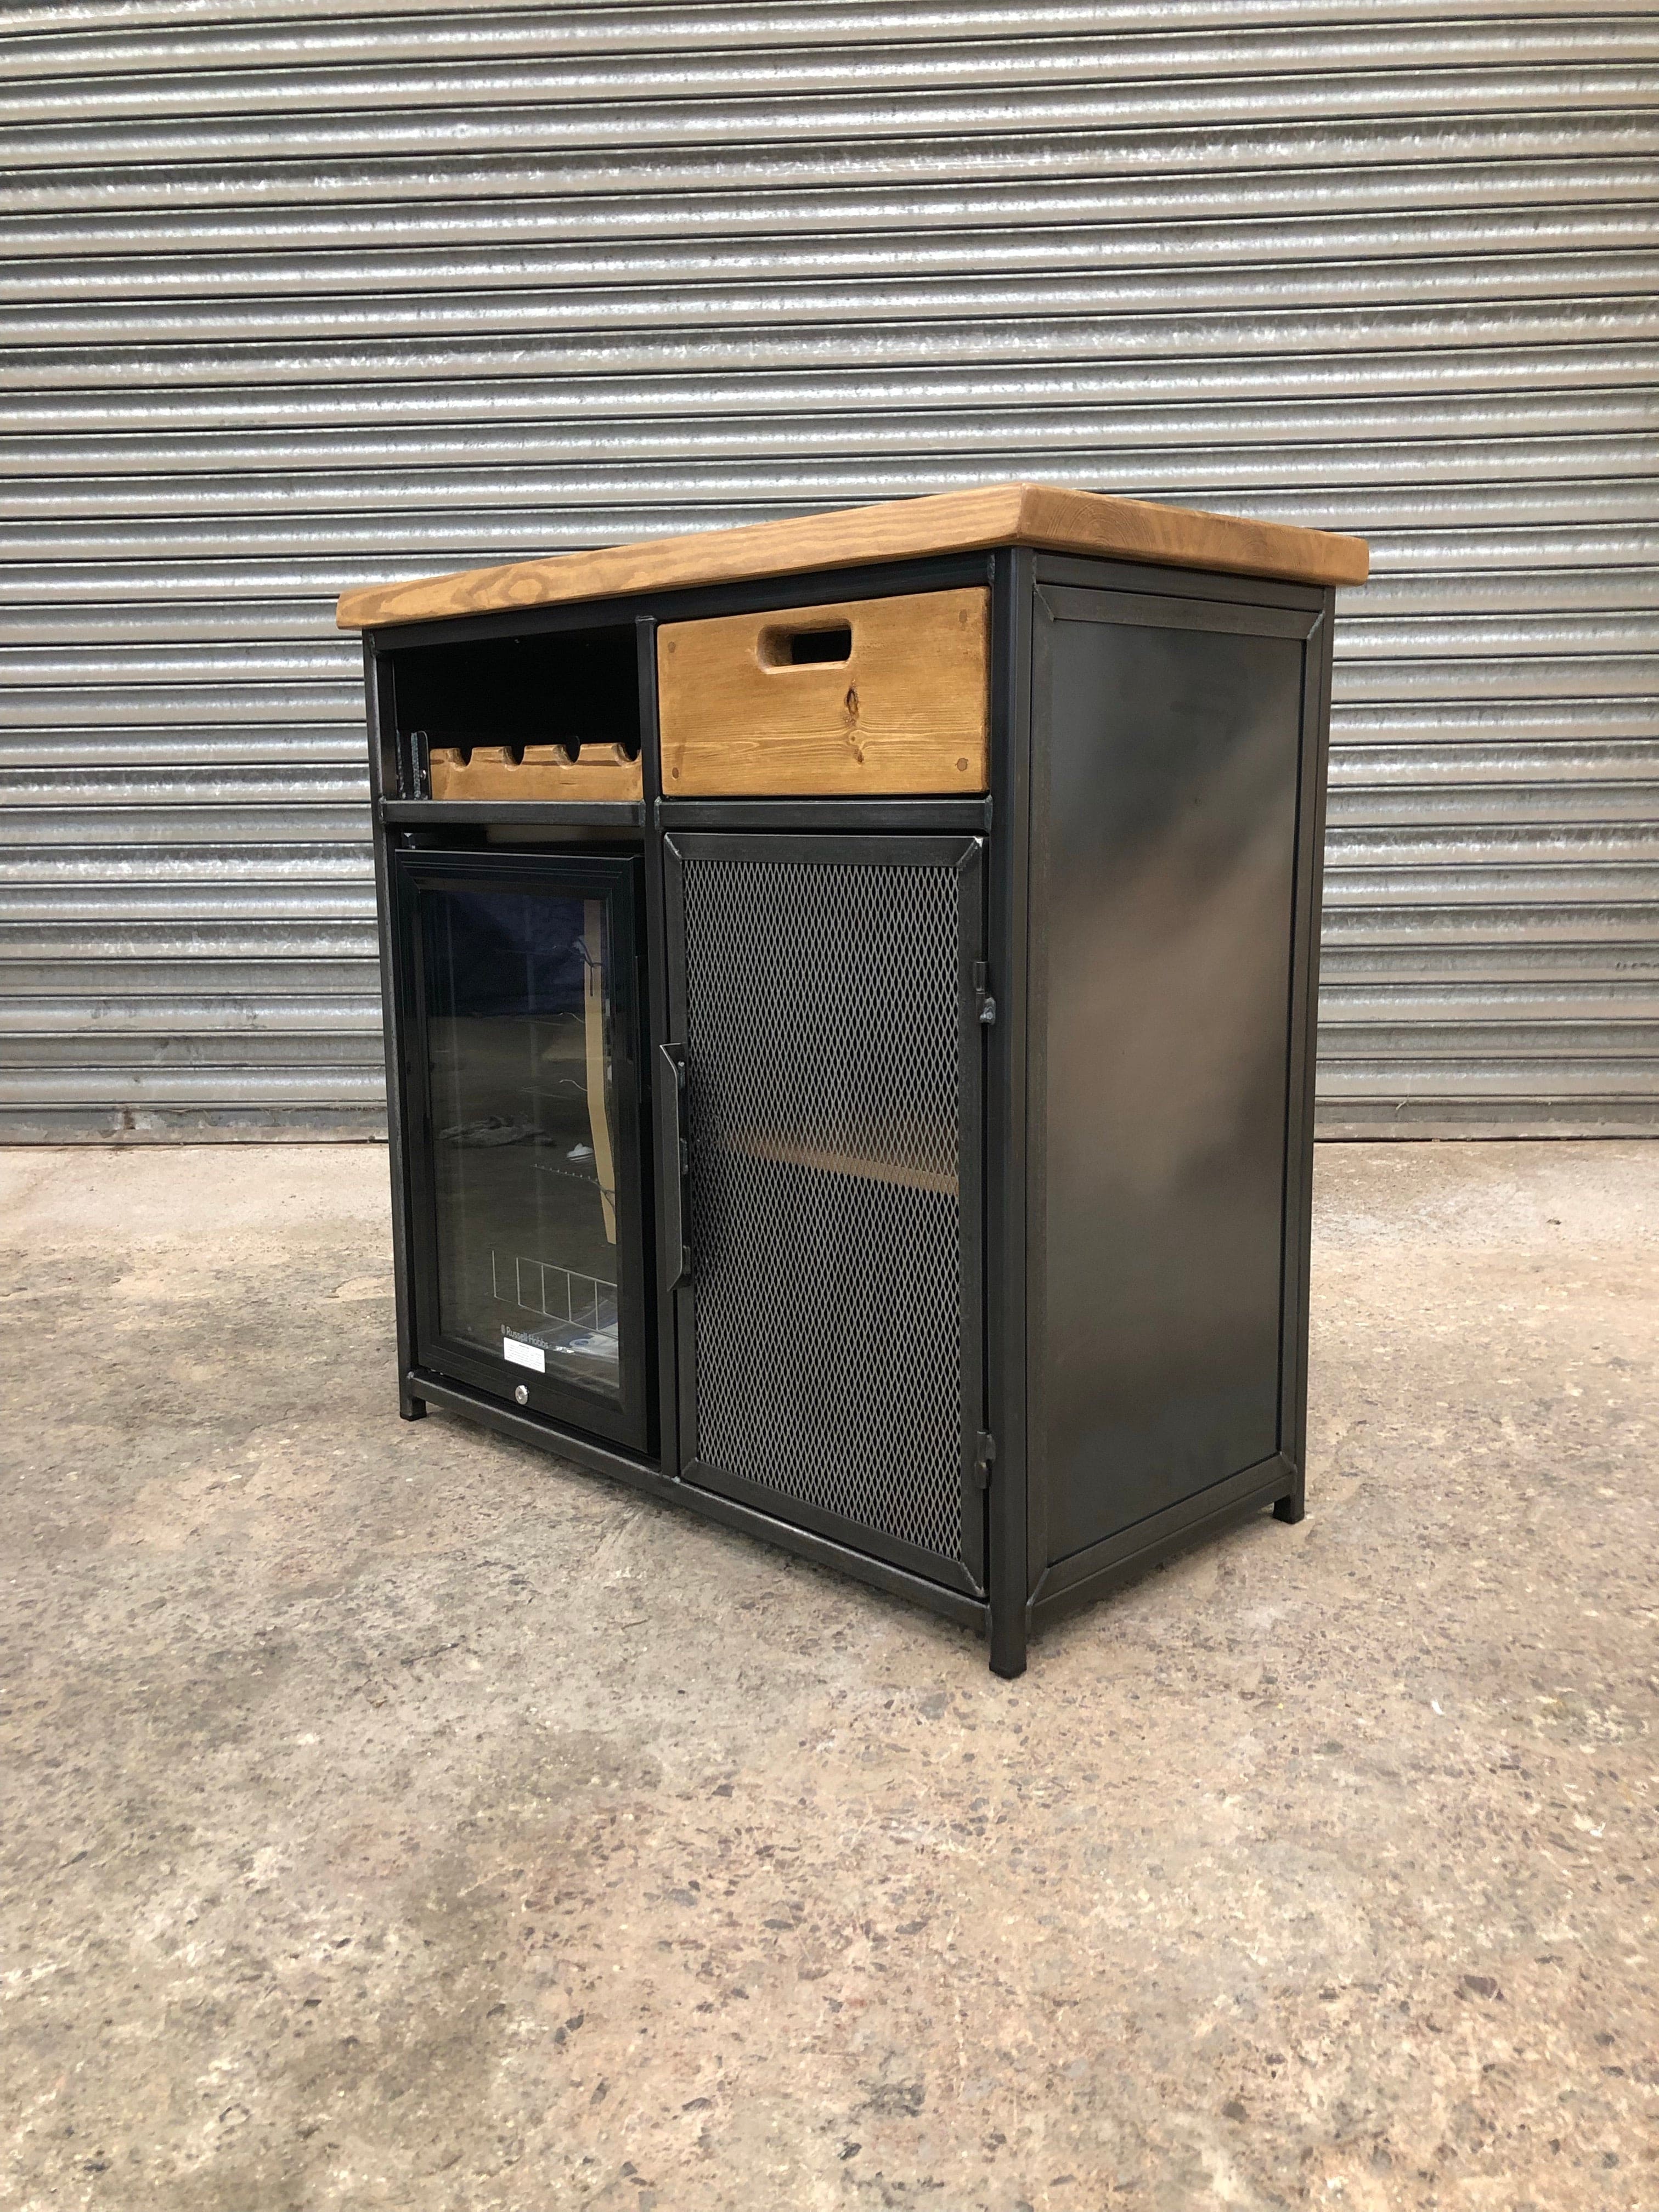 Modern Industrial Home Bar Drinks Cabinet with Built-In Fridge, Wine Rack and Drawer  RSD Furniture   